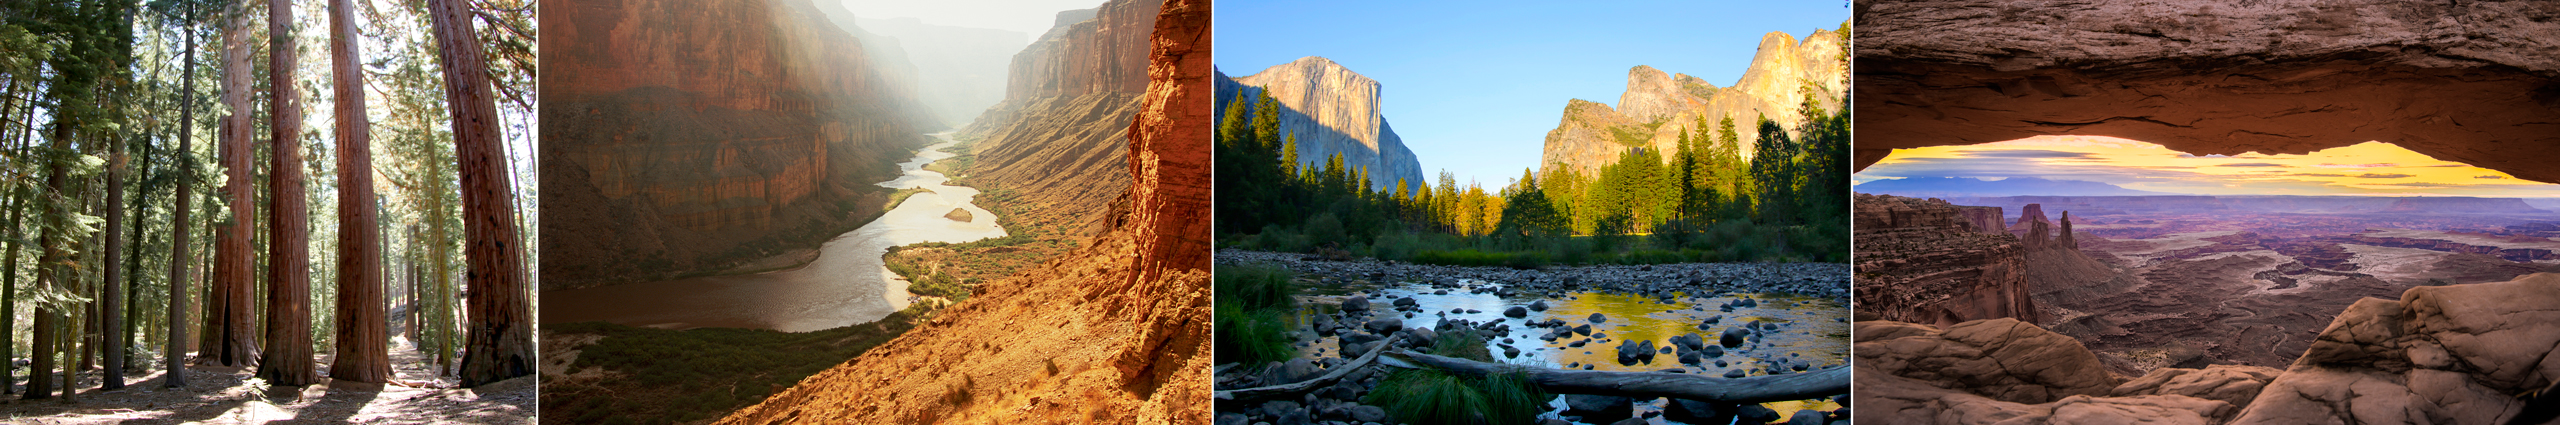 Left to right: Views of the sequoias at Yosemite National Park, the Colorado River at the Grand Canyon, Cathedral Rocks at Yosemite, and the Mesa Arch at Canyonlands National Park